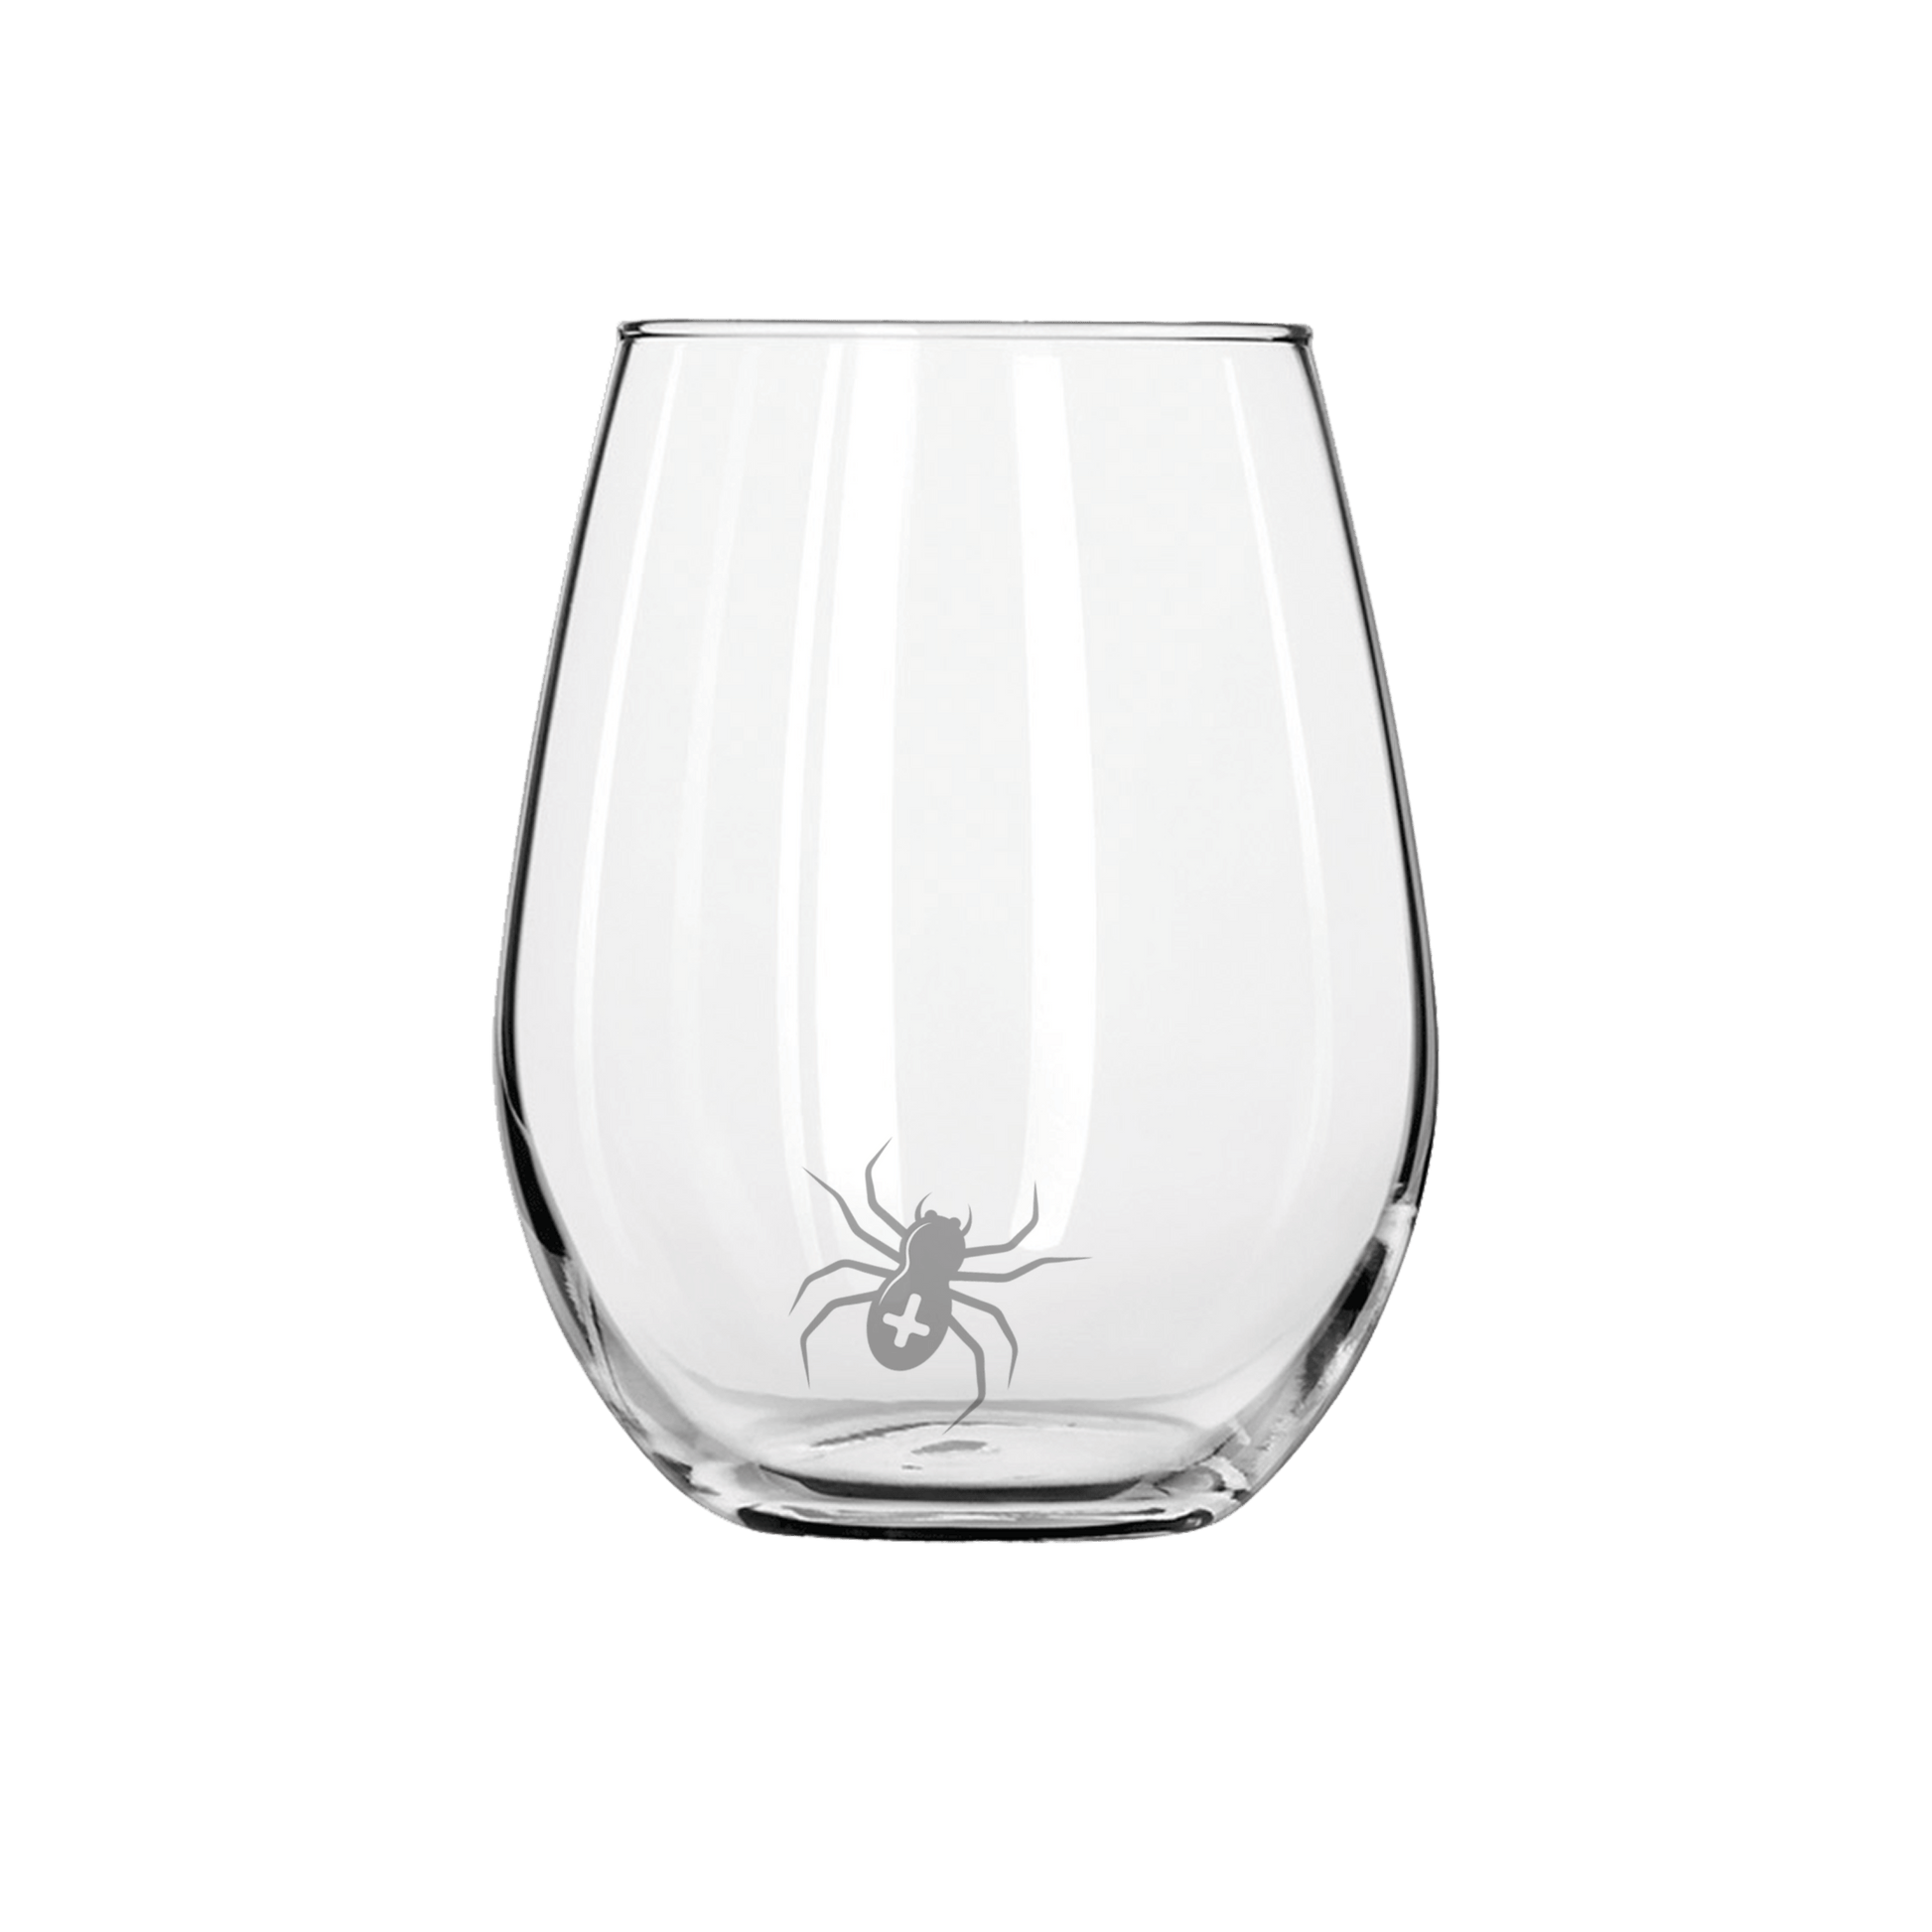 Halloween Itsy Bitsy Spider Etched Stemless Wine Glass 20.5oz - Expressive DeZien 